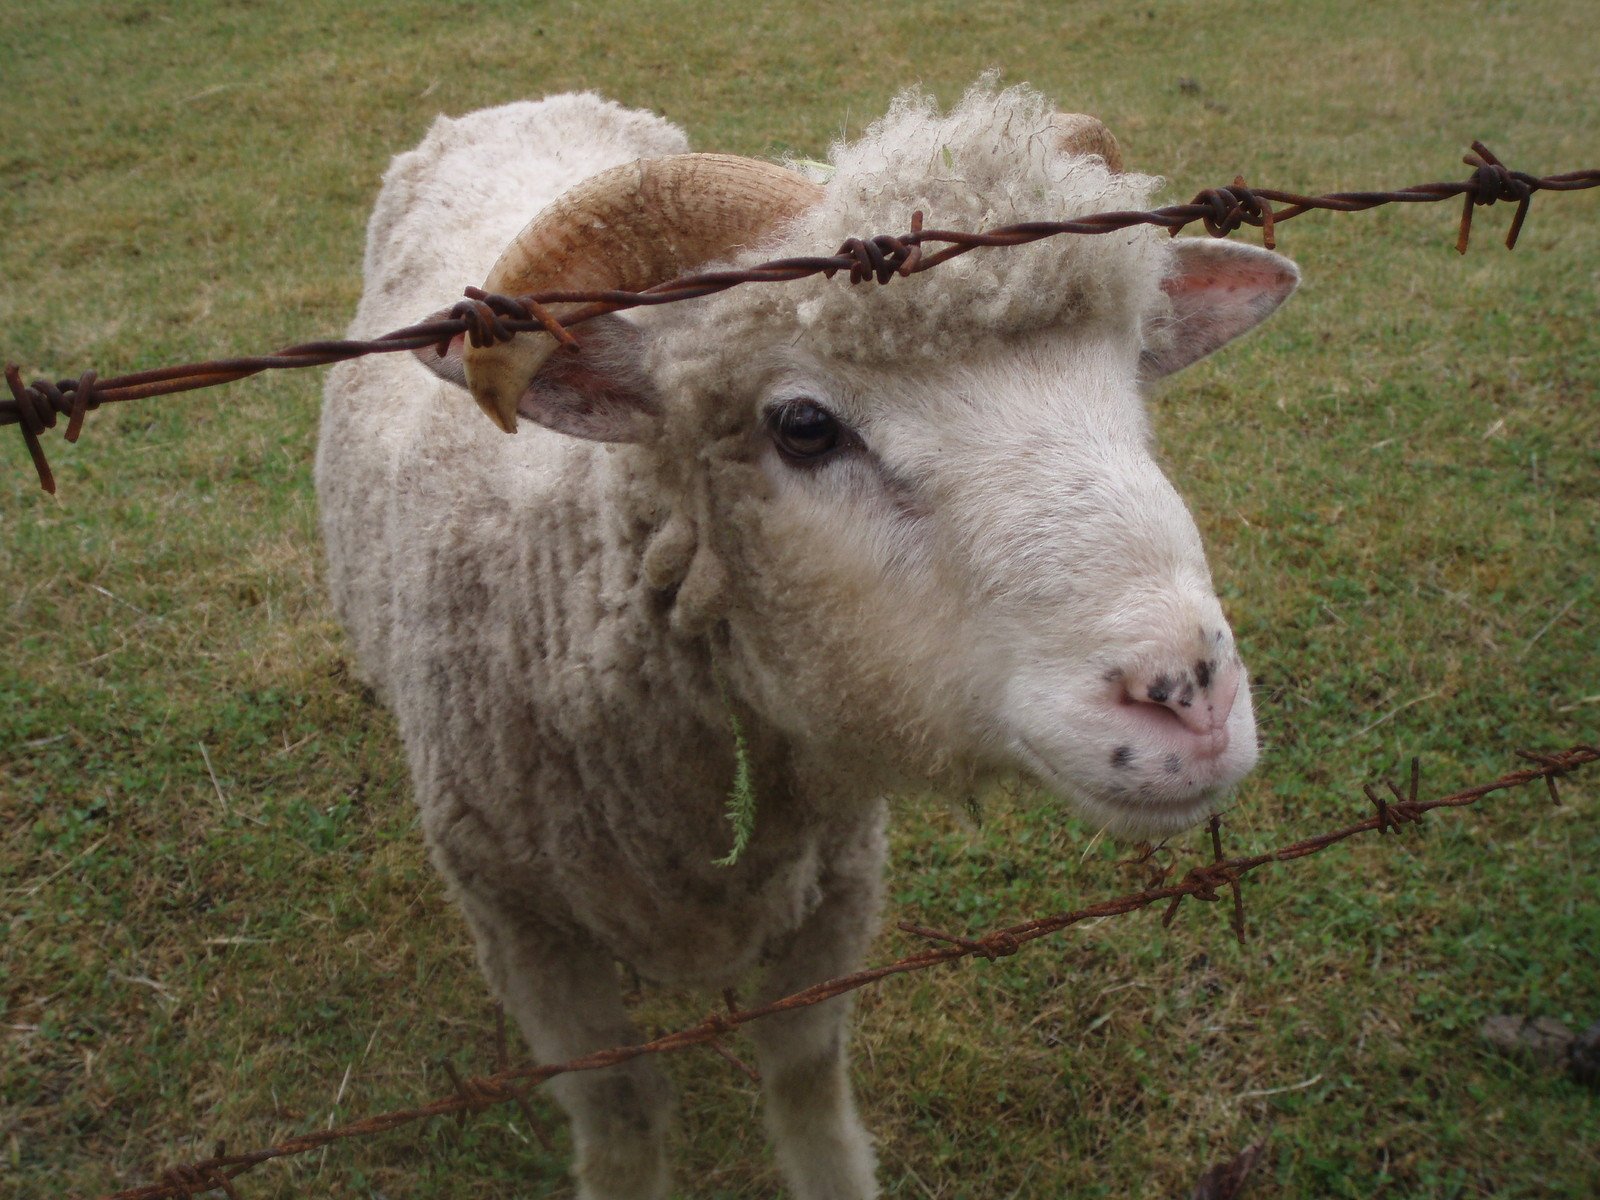 an animal behind barbed wire in the grass